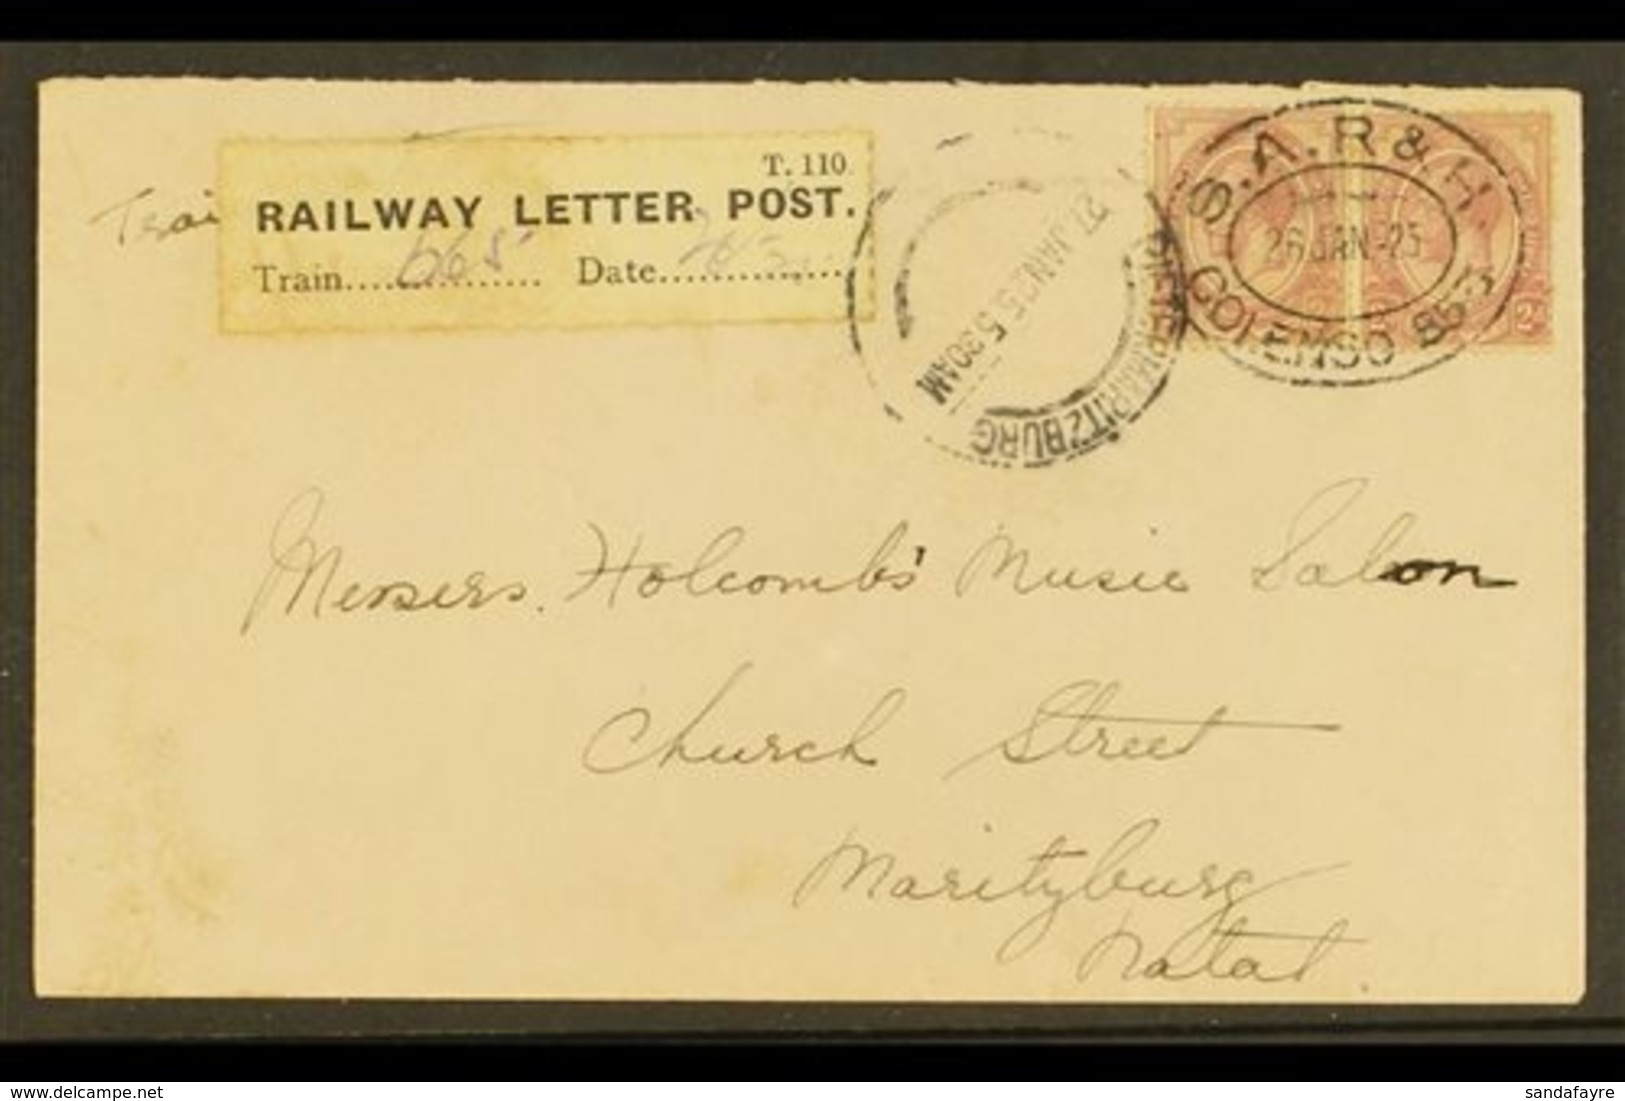 1925 RAILWAY LETTER POST COVER 2d KGV Pair On Cover, Cancelled With Oval "S.A.R. & H. COLENSO 853" 26.1.25 Postmark, "T. - Ohne Zuordnung